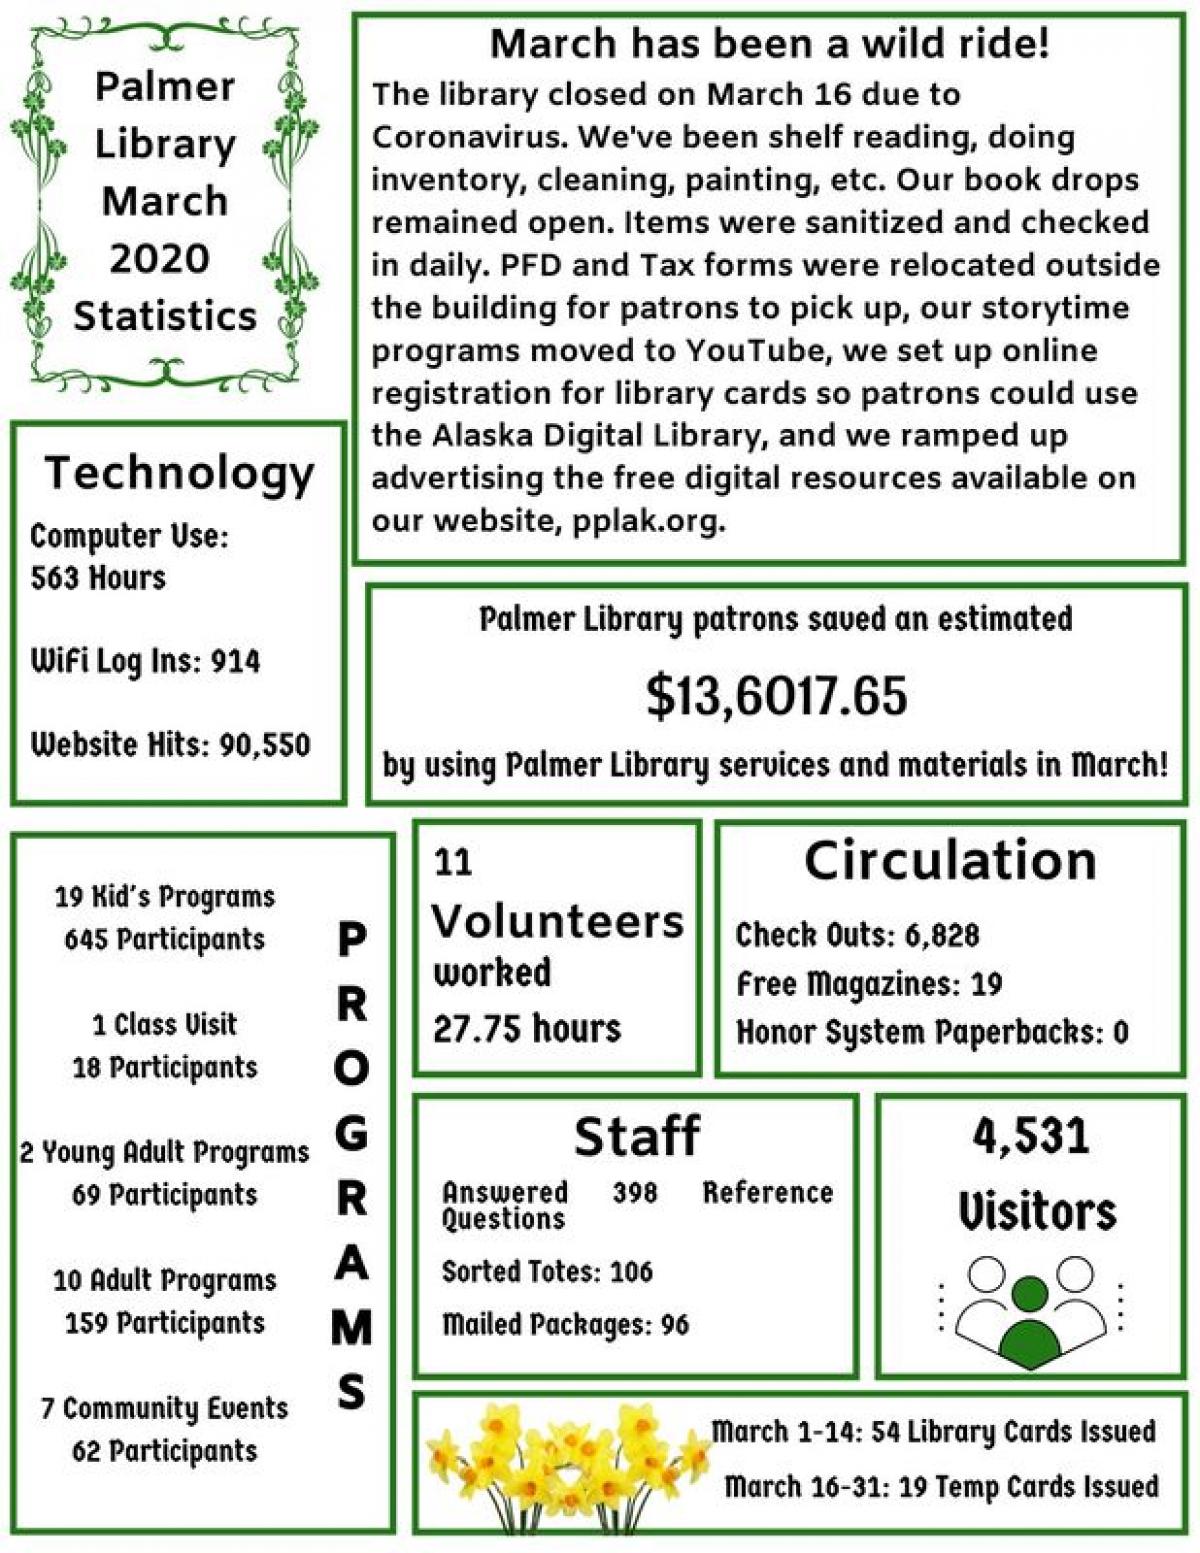 Library statistics for the month of March